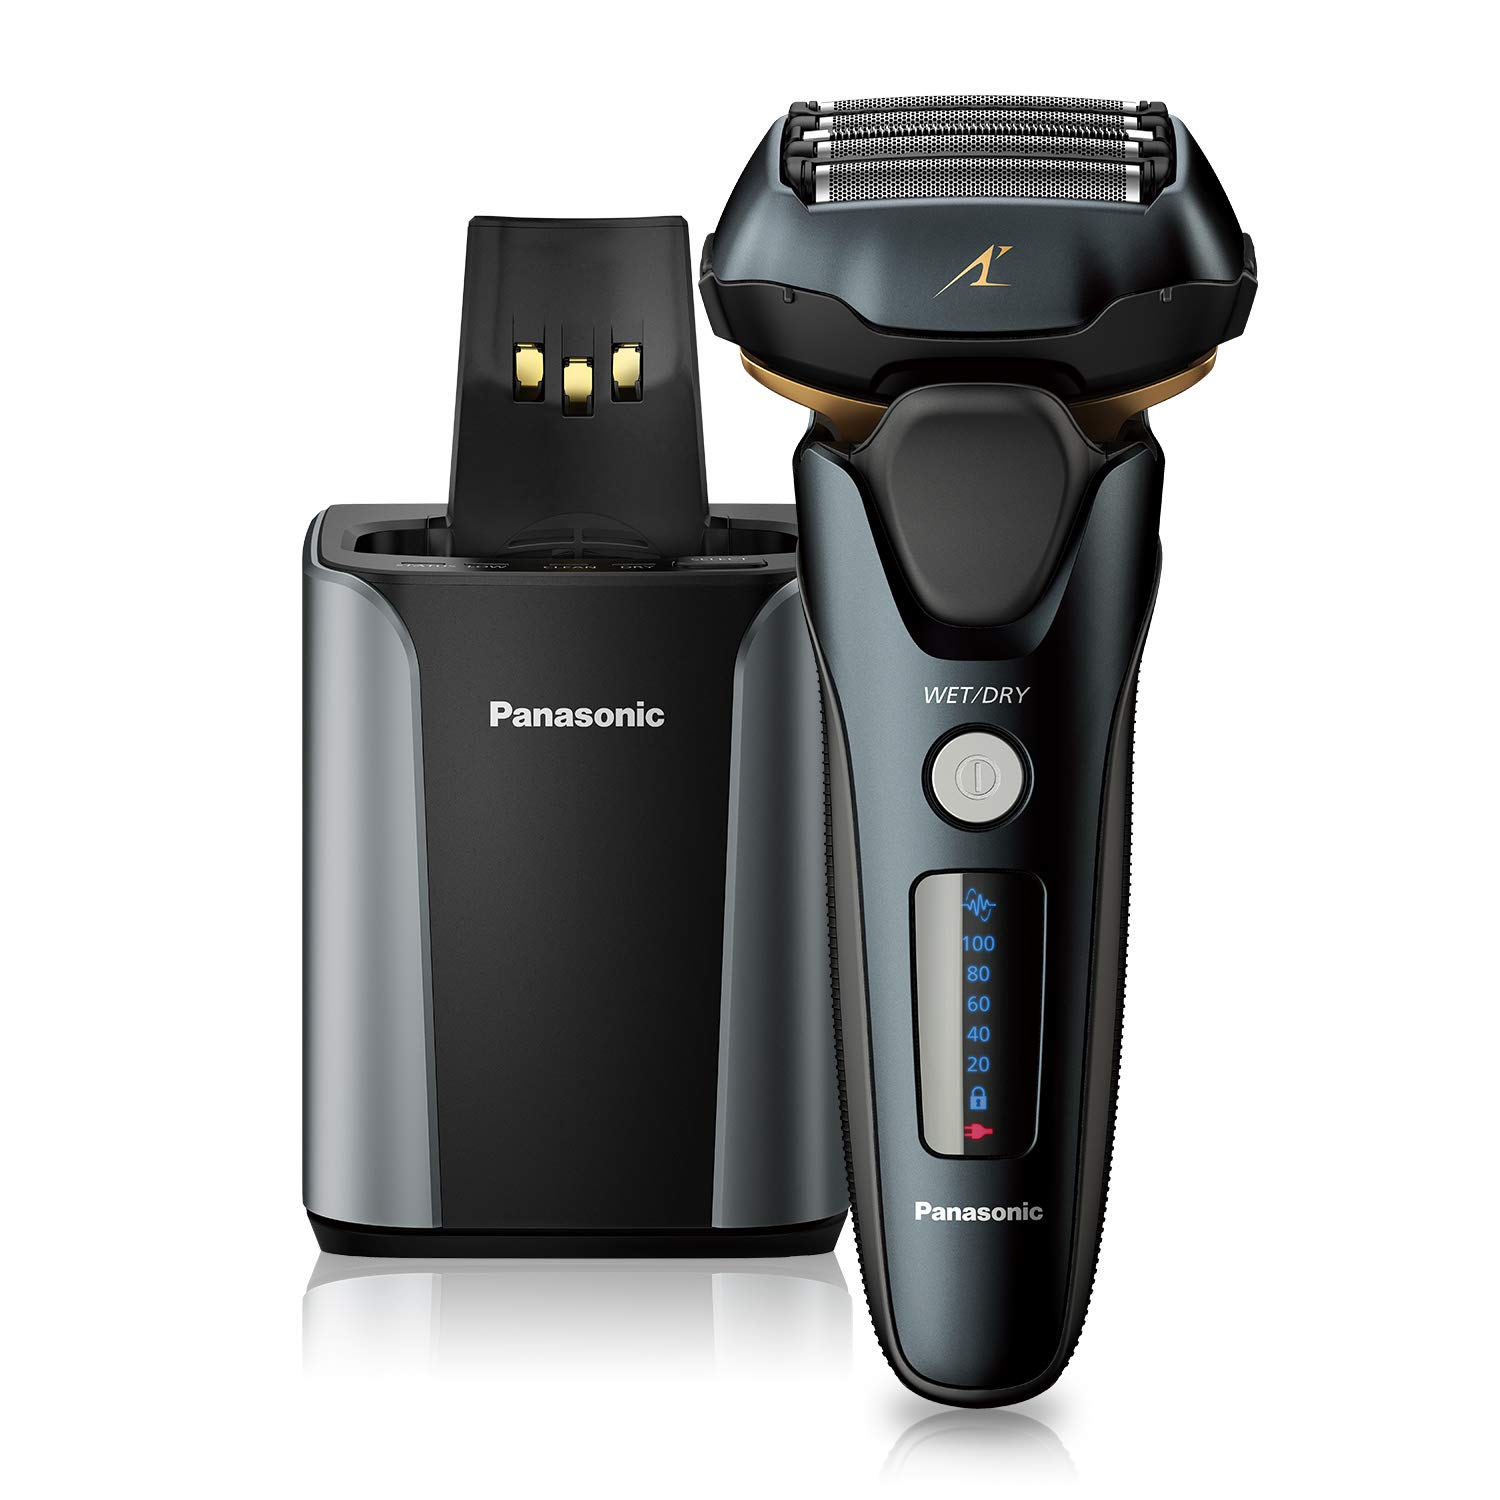 Panasonic Electric Razor for Men, ARC5 with Premium Automatic Cleaning and Charging Station (Black) $149.99 + Free Shipping for Prime Members